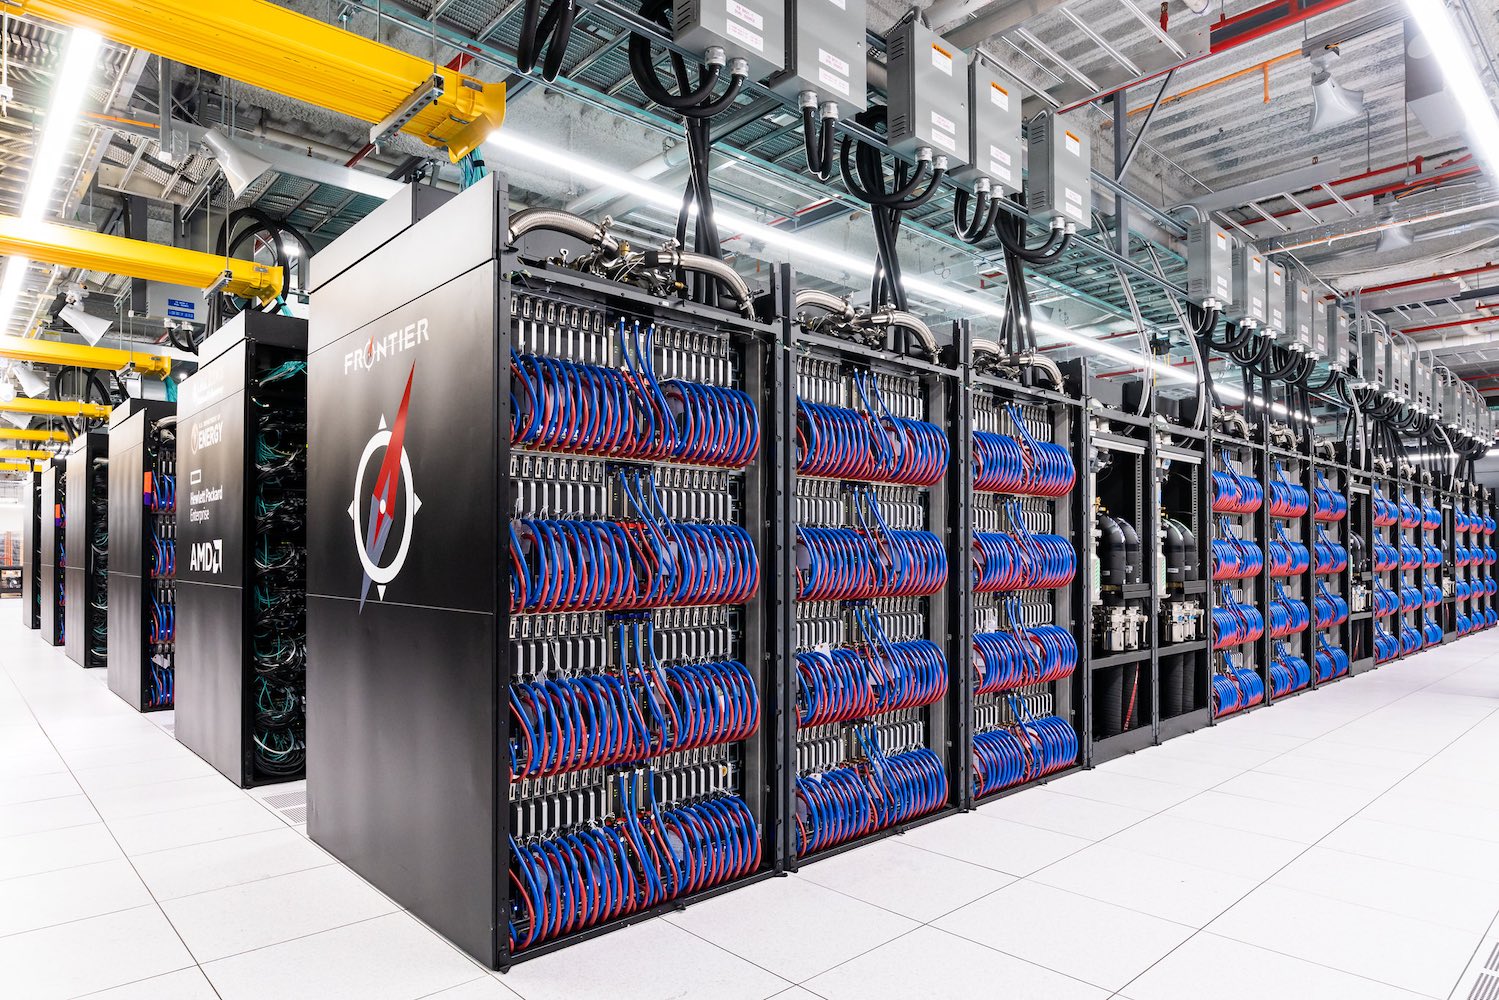 A large white room filled with rows of tall black containers holding computer components with blue and red wiring visible